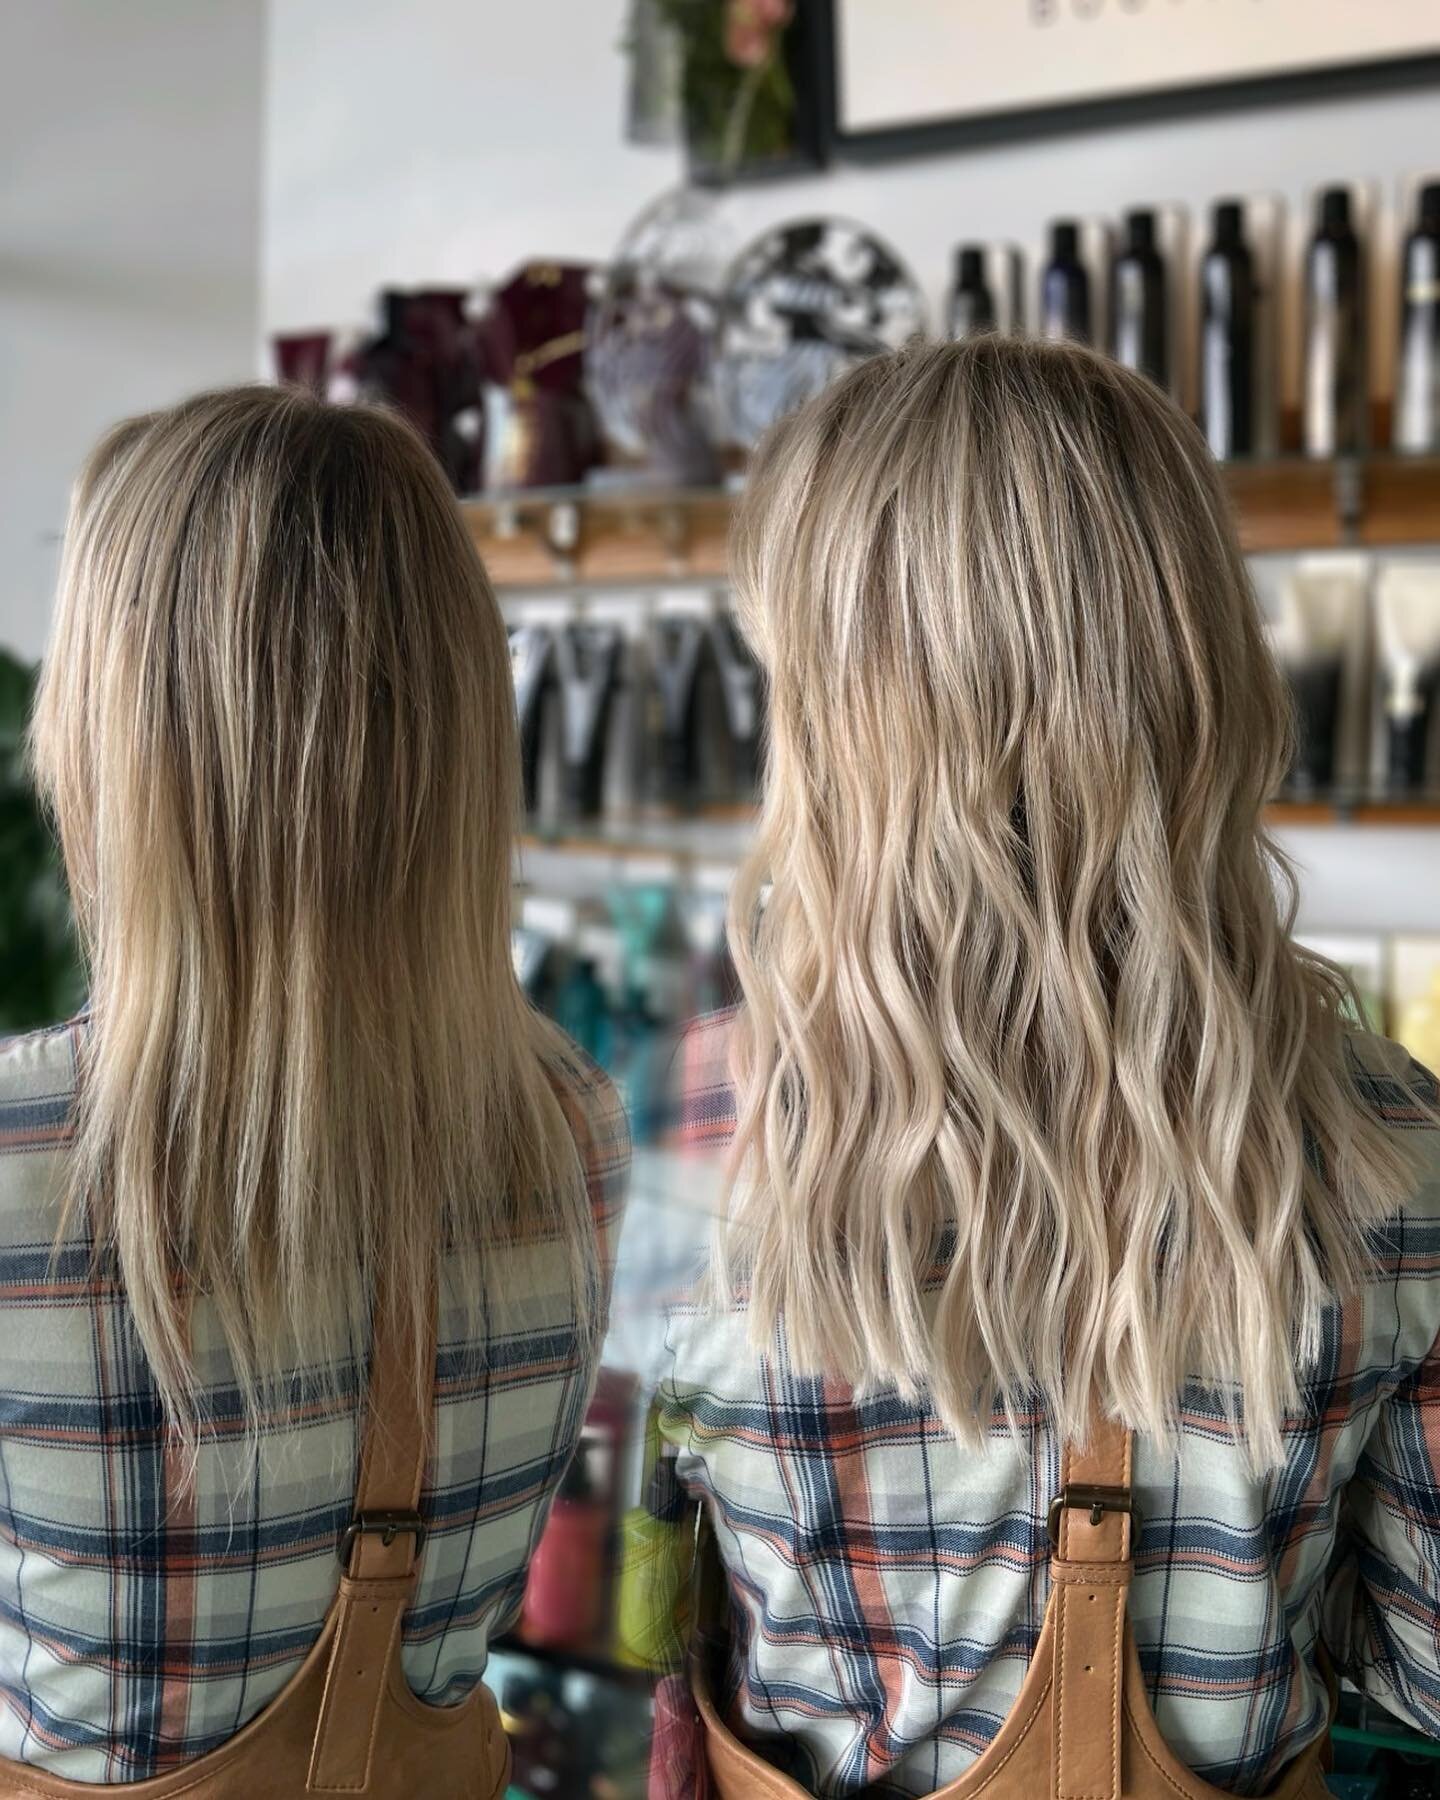 Extensions are such a great transformative tool! Whether it&rsquo;s color, density, or length that you&rsquo;re wanting to enhance, extensions can help 😉
&bull;
&bull;
&bull;
Client is wearing 2 rows of 16&rdquo; @bellamihair volume weft extensions 